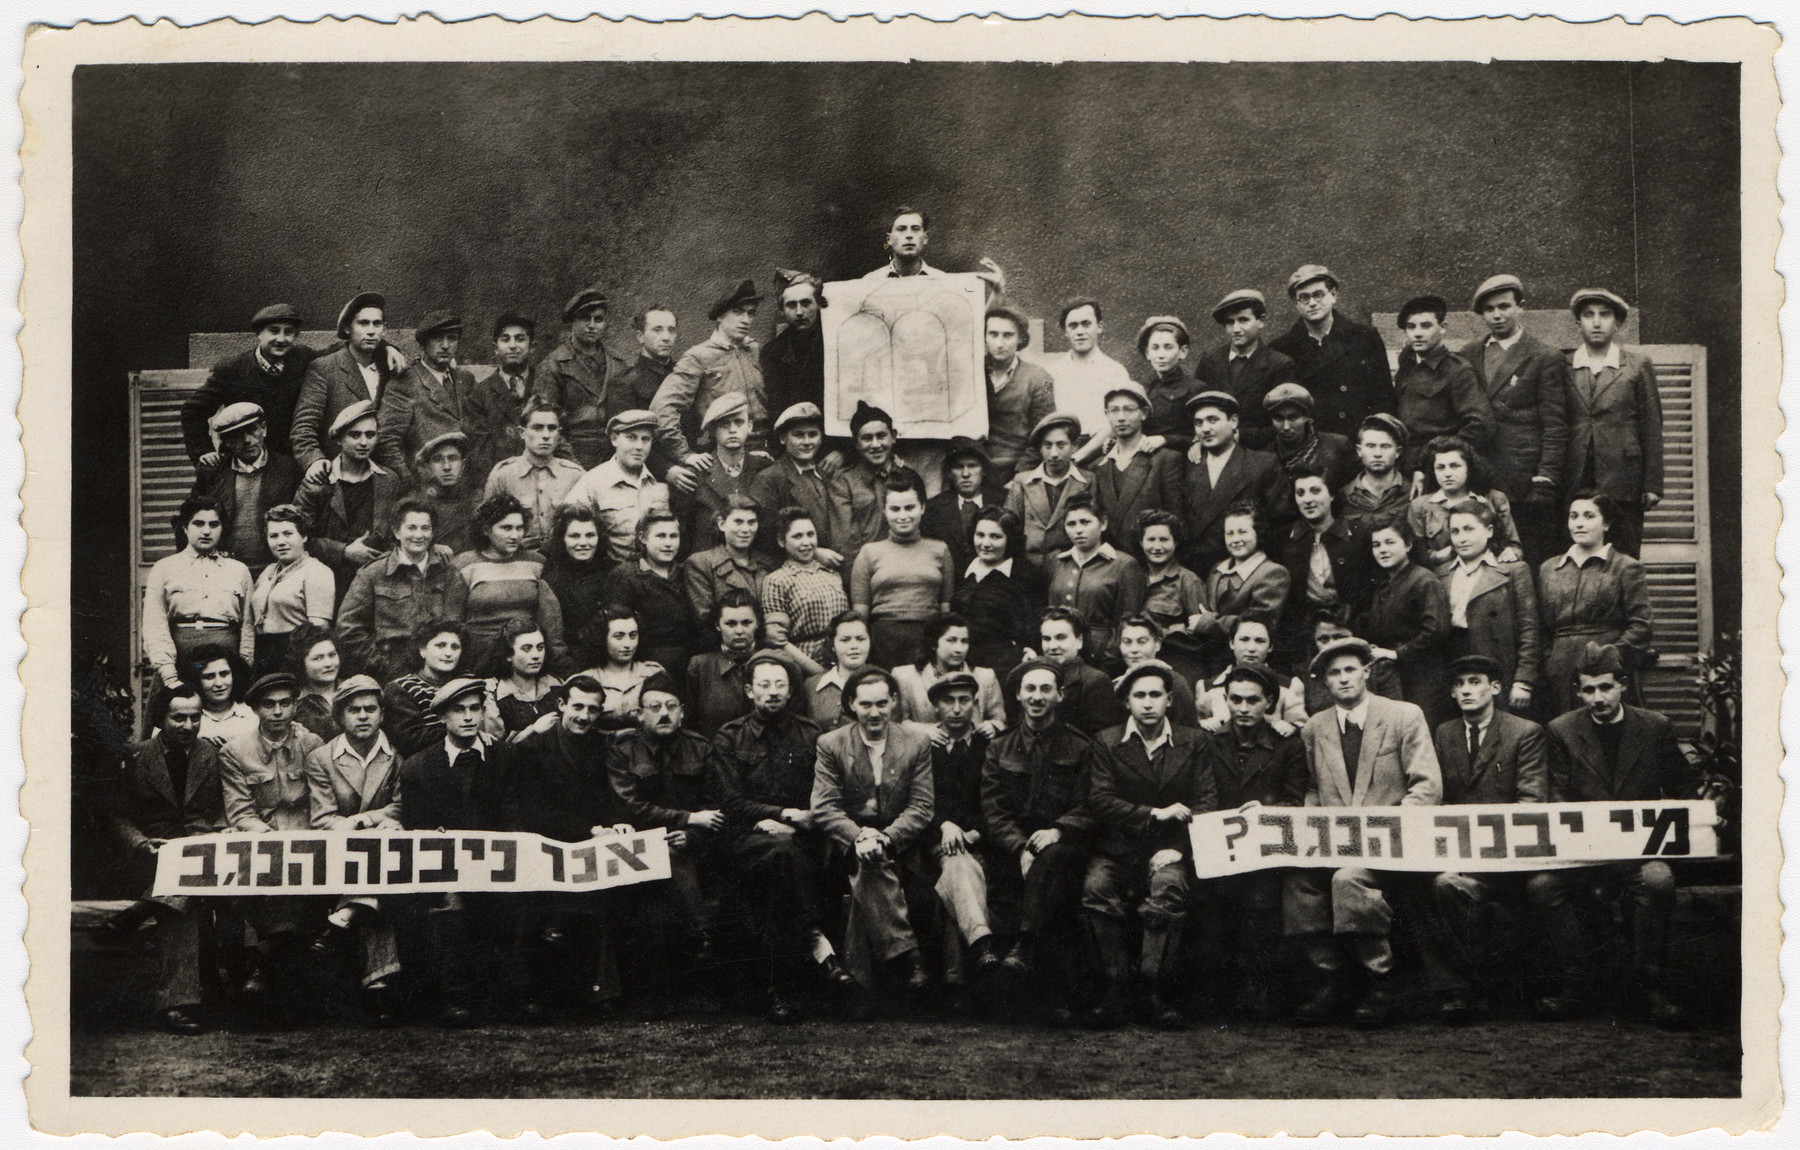 Group portrait of members of a Poal Mizrachi hachshara.

They are holding a sign with the Bnai Akiva logo and Hebrew banners which read "Who will build the Negev?  We will build the Negev".